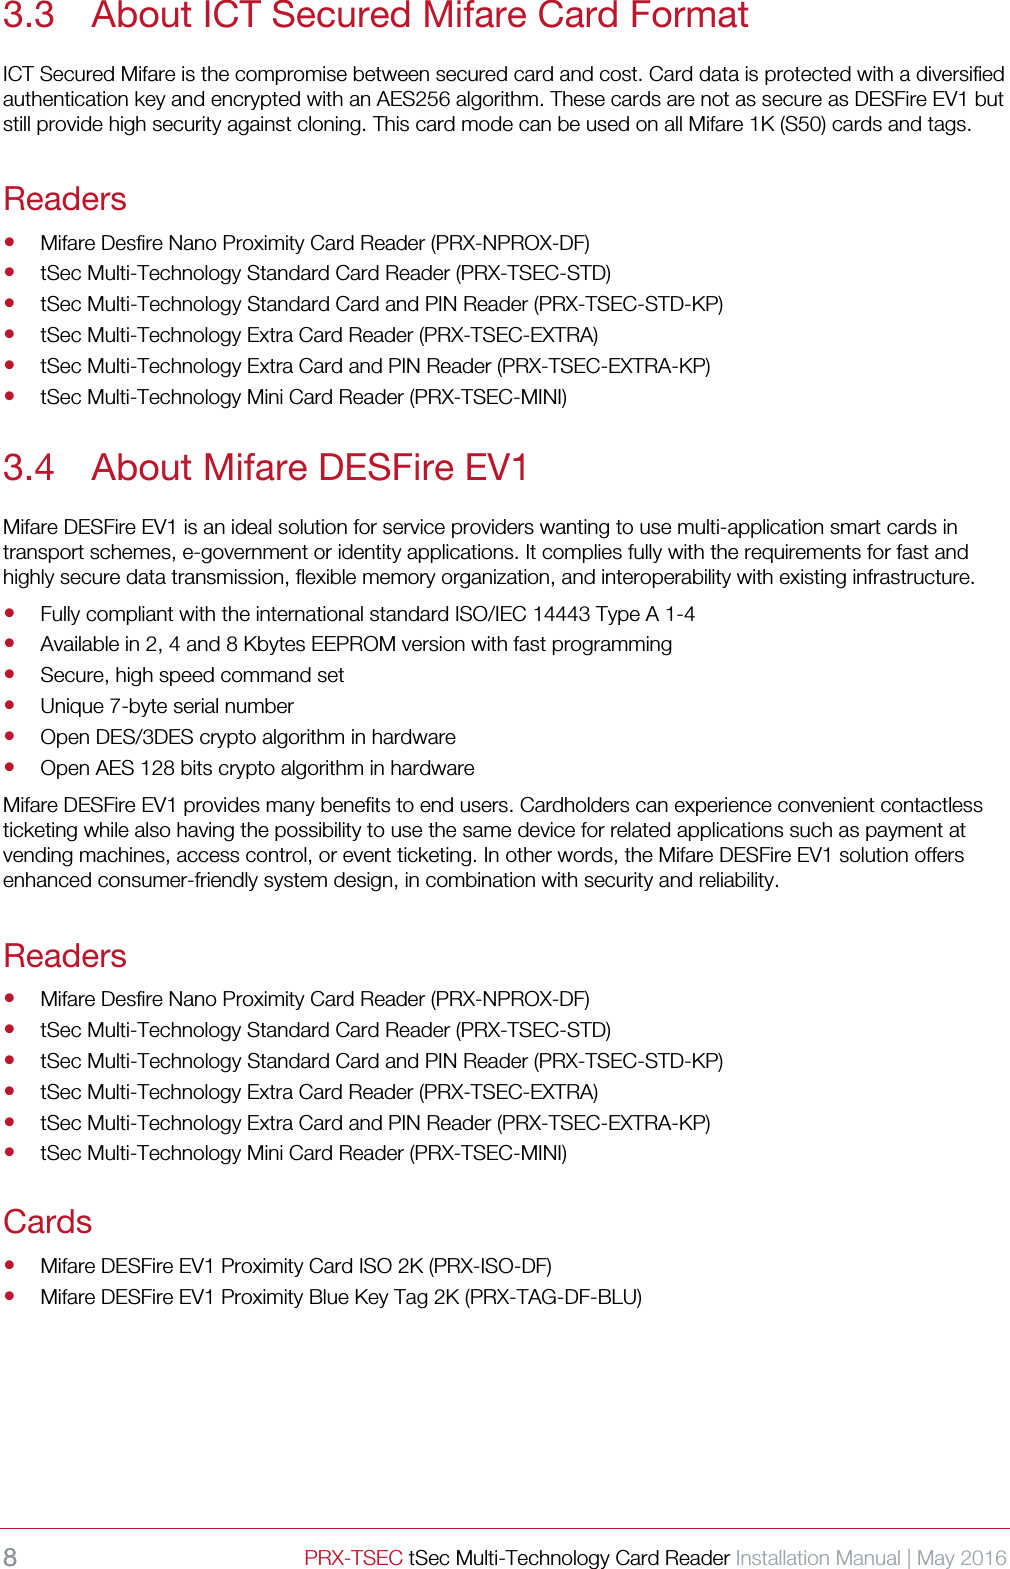 8 PRX-TSEC tSec Multi-Technology Card Reader Installation Manual | May 2016    3.3 About ICT Secured Mifare Card Format ICT Secured Mifare is the compromise between secured card and cost. Card data is protected with a diversified authentication key and encrypted with an AES256 algorithm. These cards are not as secure as DESFire EV1 but still provide high security against cloning. This card mode can be used on all Mifare 1K (S50) cards and tags. Readers  Mifare Desfire Nano Proximity Card Reader (PRX-NPROX-DF)  tSec Multi-Technology Standard Card Reader (PRX-TSEC-STD)  tSec Multi-Technology Standard Card and PIN Reader (PRX-TSEC-STD-KP)  tSec Multi-Technology Extra Card Reader (PRX-TSEC-EXTRA)  tSec Multi-Technology Extra Card and PIN Reader (PRX-TSEC-EXTRA-KP)  tSec Multi-Technology Mini Card Reader (PRX-TSEC-MINI) 3.4 About Mifare DESFire EV1 Mifare DESFire EV1 is an ideal solution for service providers wanting to use multi-application smart cards in transport schemes, e-government or identity applications. It complies fully with the requirements for fast and highly secure data transmission, flexible memory organization, and interoperability with existing infrastructure.    Fully compliant with the international standard ISO/IEC 14443 Type A 1-4    Available in 2, 4 and 8 Kbytes EEPROM version with fast programming  Secure, high speed command set  Unique 7-byte serial number  Open DES/3DES crypto algorithm in hardware  Open AES 128 bits crypto algorithm in hardware Mifare DESFire EV1 provides many benefits to end users. Cardholders can experience convenient contactless ticketing while also having the possibility to use the same device for related applications such as payment at vending machines, access control, or event ticketing. In other words, the Mifare DESFire EV1 solution offers enhanced consumer-friendly system design, in combination with security and reliability.   Readers  Mifare Desfire Nano Proximity Card Reader (PRX-NPROX-DF)  tSec Multi-Technology Standard Card Reader (PRX-TSEC-STD)  tSec Multi-Technology Standard Card and PIN Reader (PRX-TSEC-STD-KP)  tSec Multi-Technology Extra Card Reader (PRX-TSEC-EXTRA)  tSec Multi-Technology Extra Card and PIN Reader (PRX-TSEC-EXTRA-KP)  tSec Multi-Technology Mini Card Reader (PRX-TSEC-MINI) Cards  Mifare DESFire EV1 Proximity Card ISO 2K (PRX-ISO-DF)  Mifare DESFire EV1 Proximity Blue Key Tag 2K (PRX-TAG-DF-BLU)    